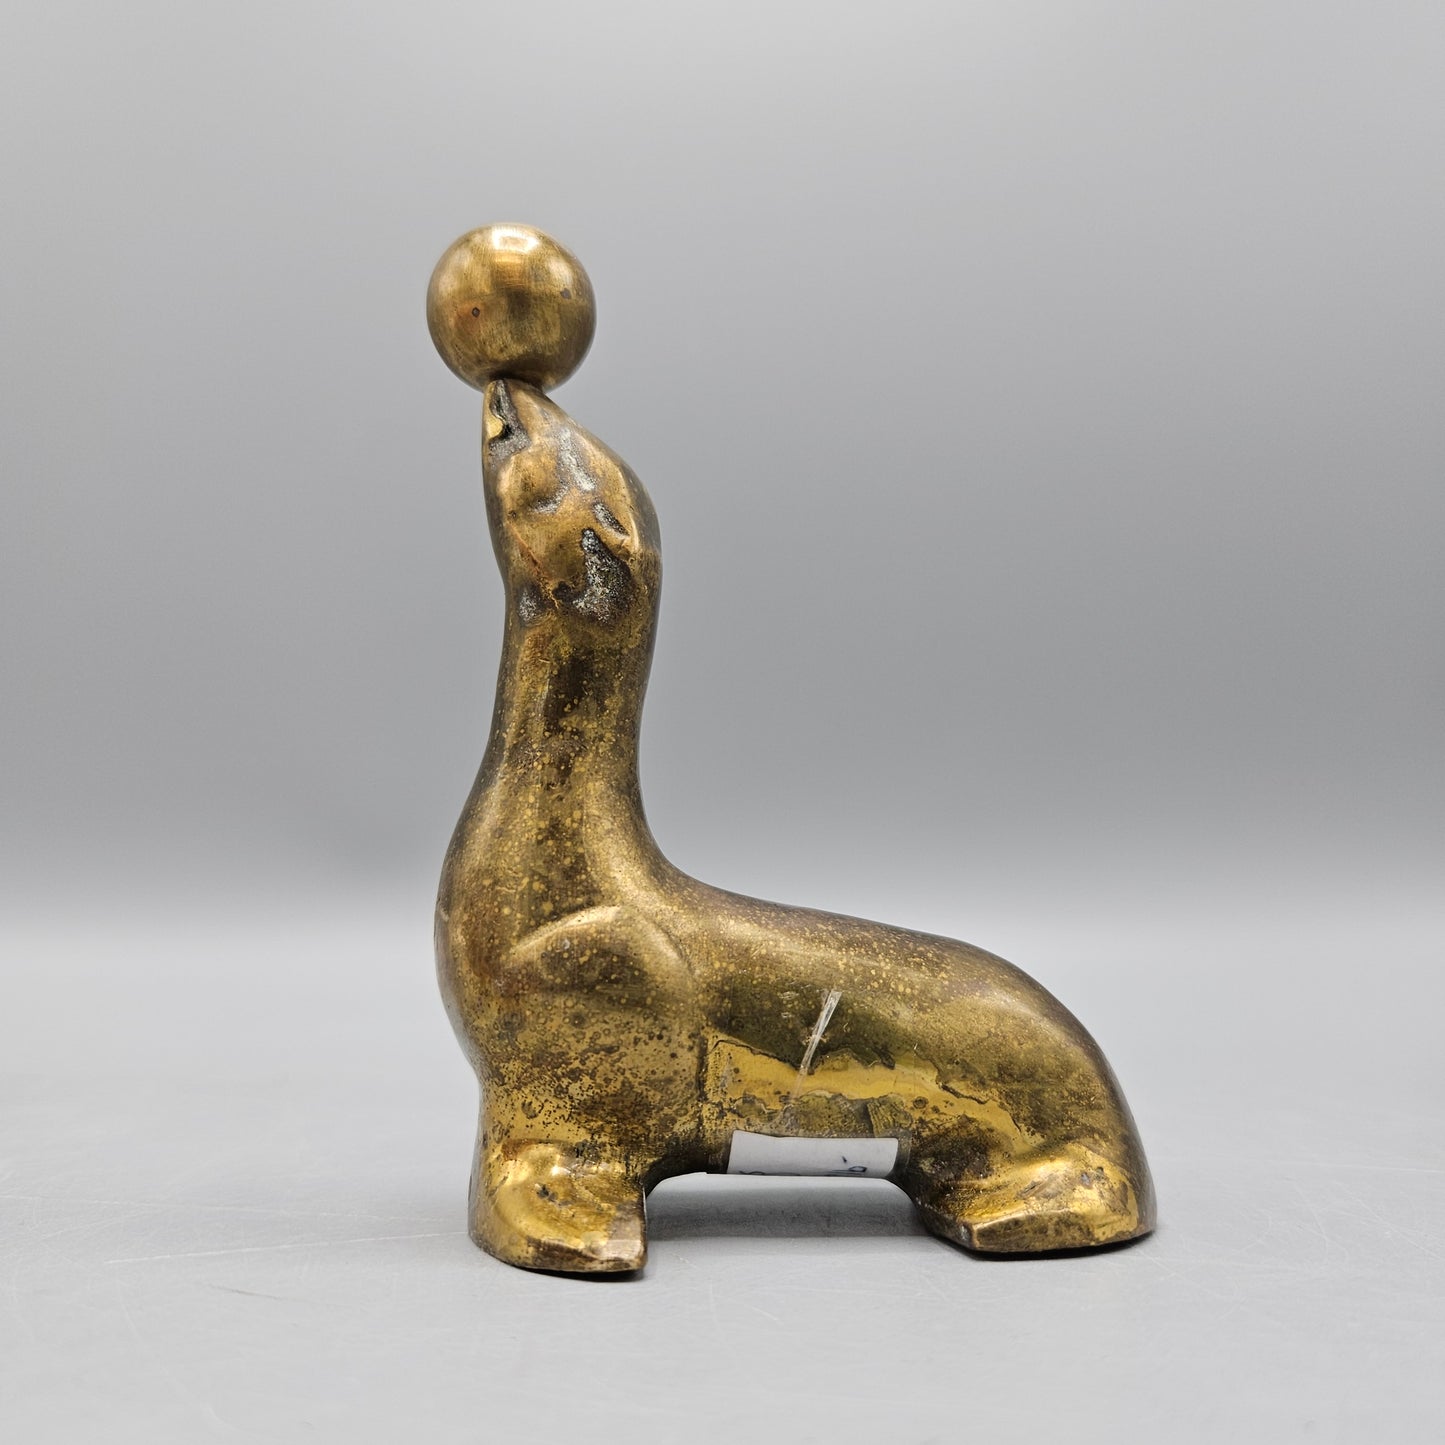 Cast Brass Seal with Ball Paperweight Figure